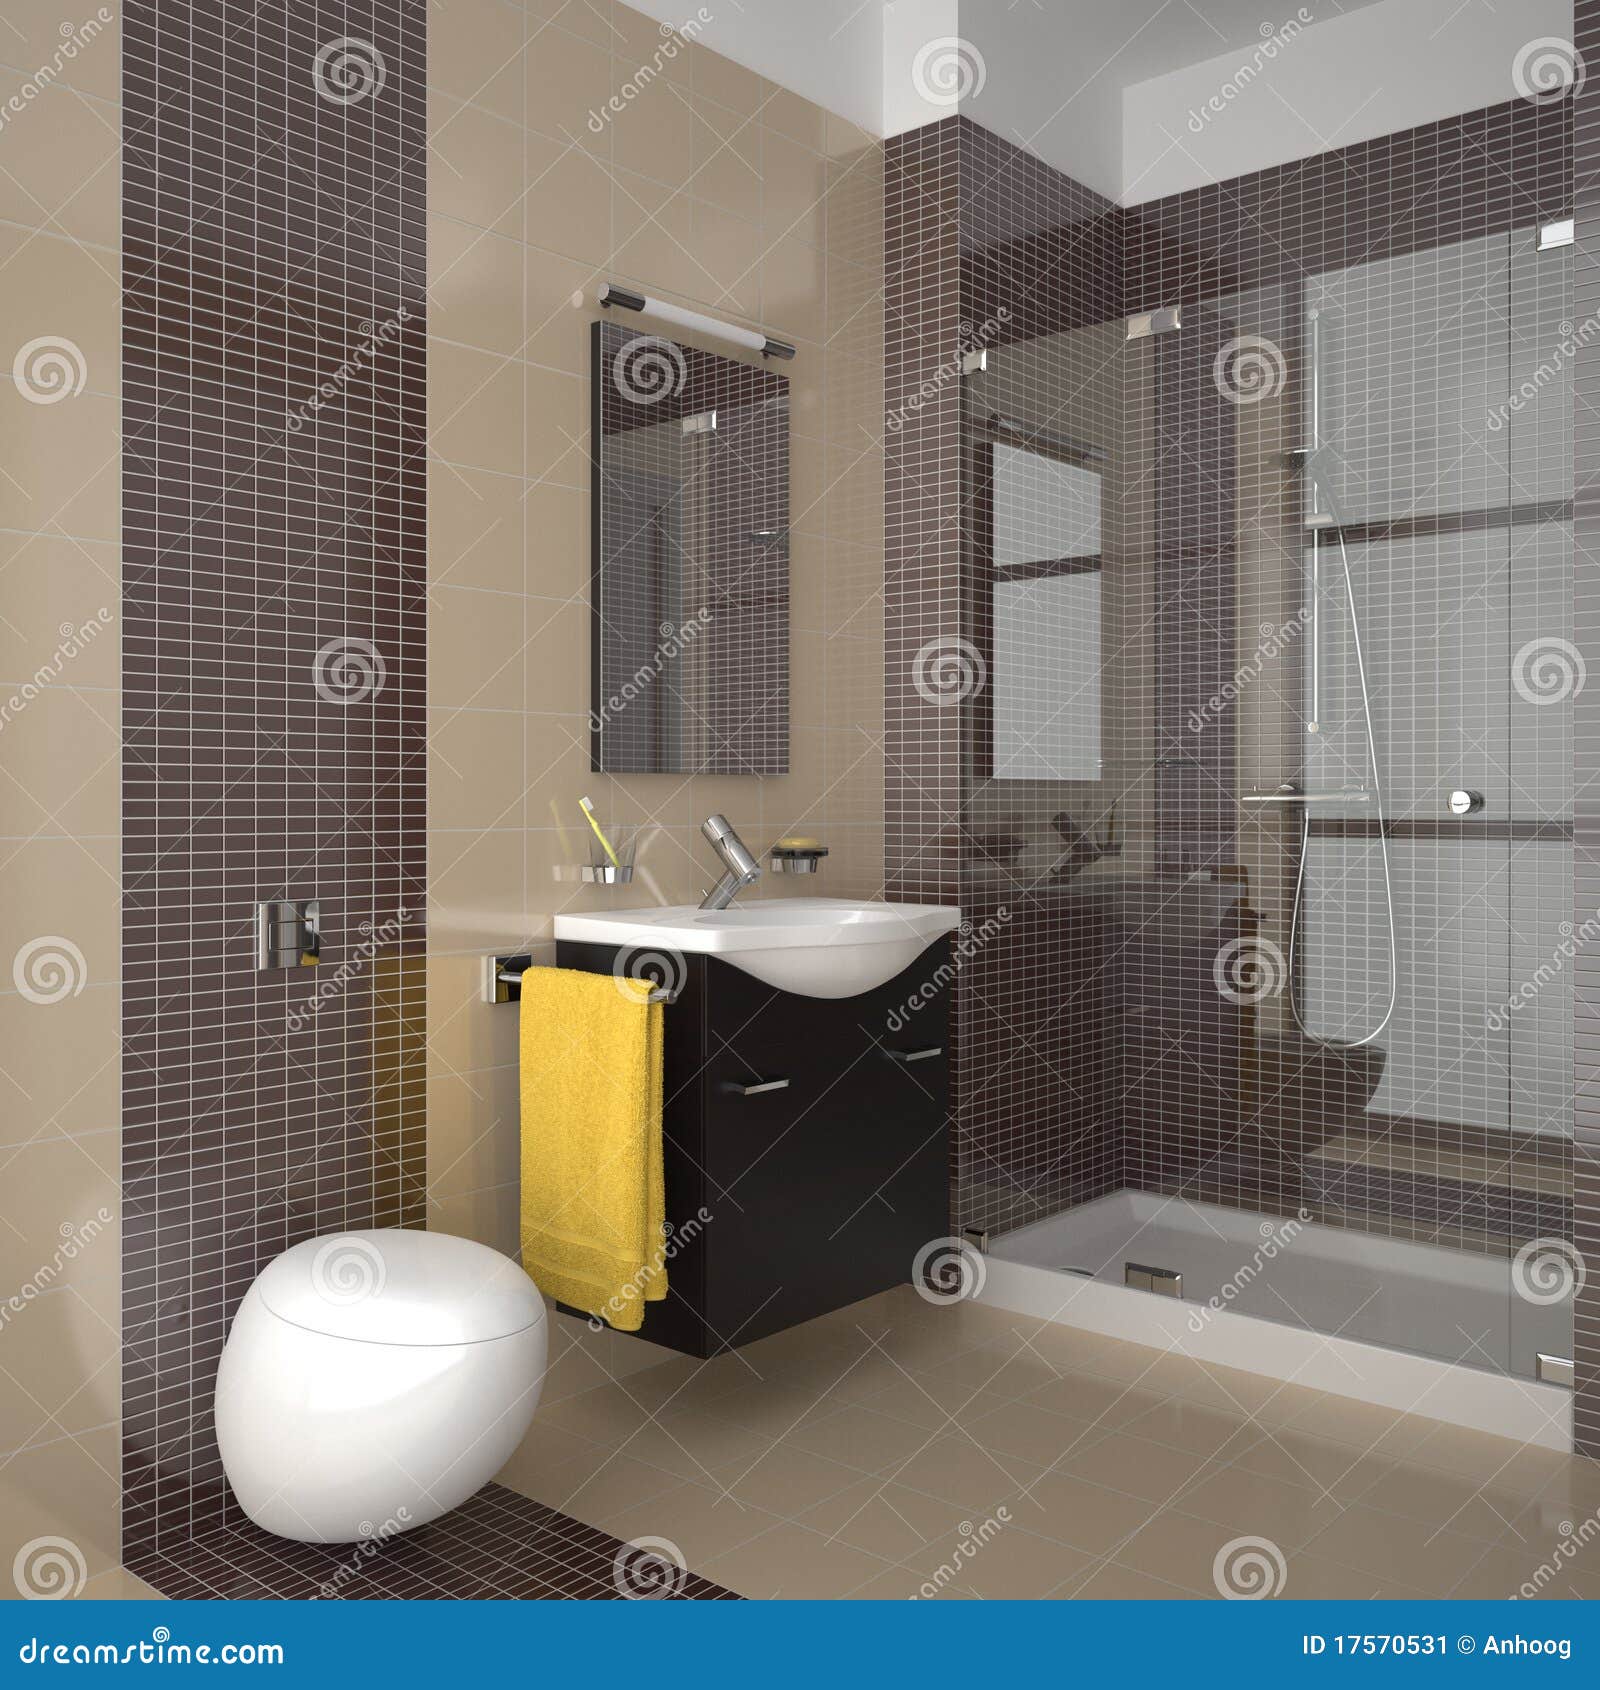 Modern Bathroom With Beige And Brown Tiles Stock Image - Image ...